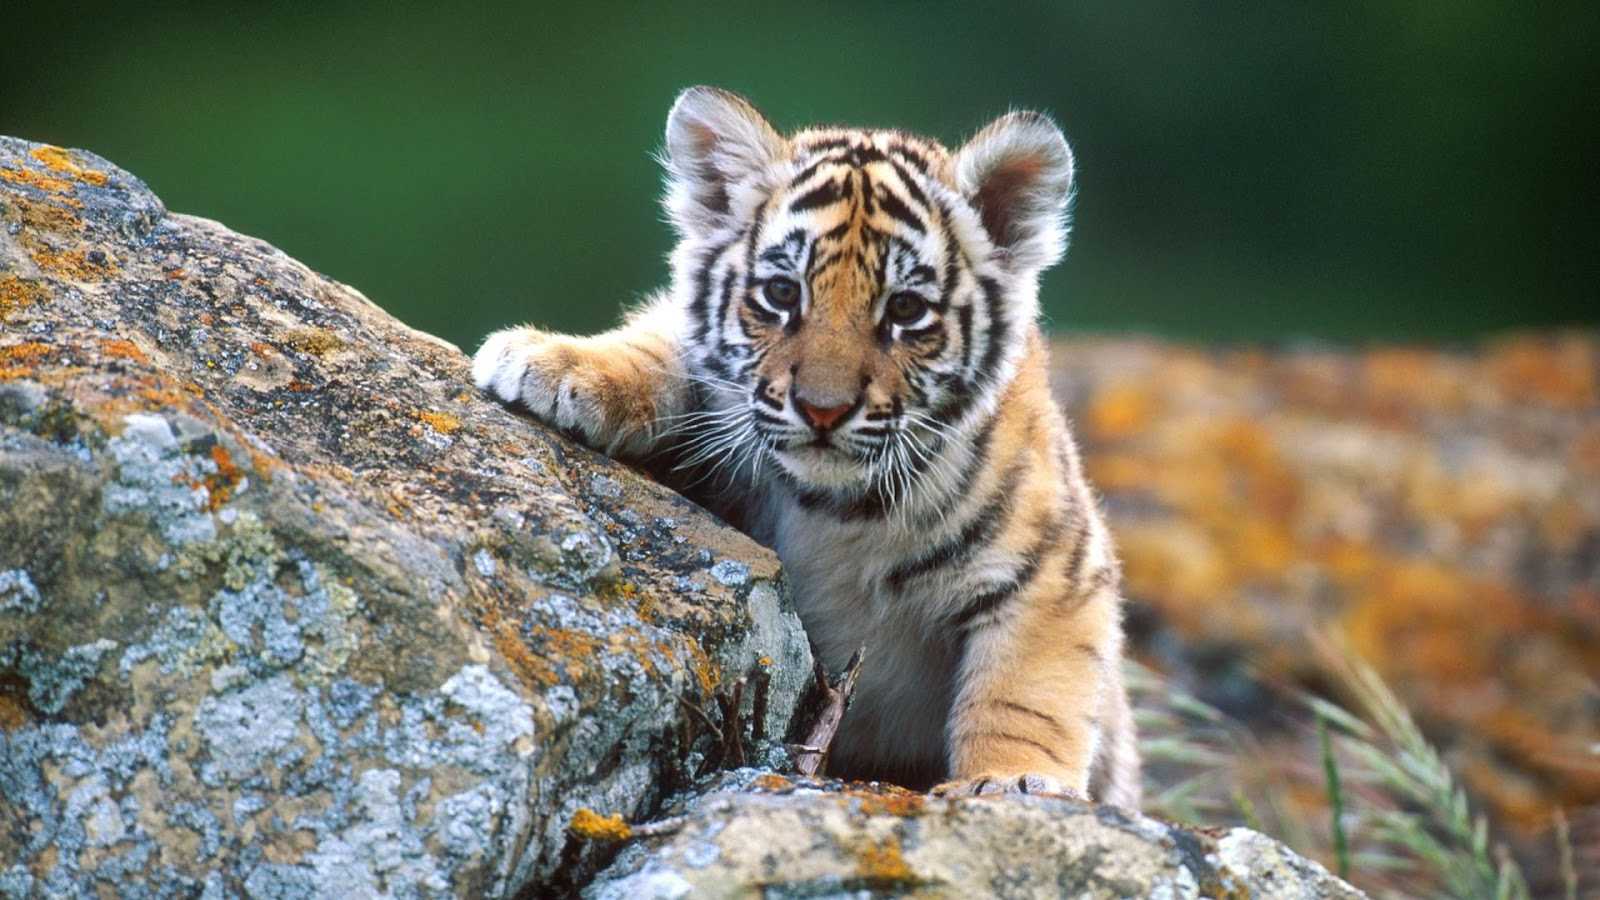 Baby Animals Wallpaper Full HD Computer Screen For Mobile Phones